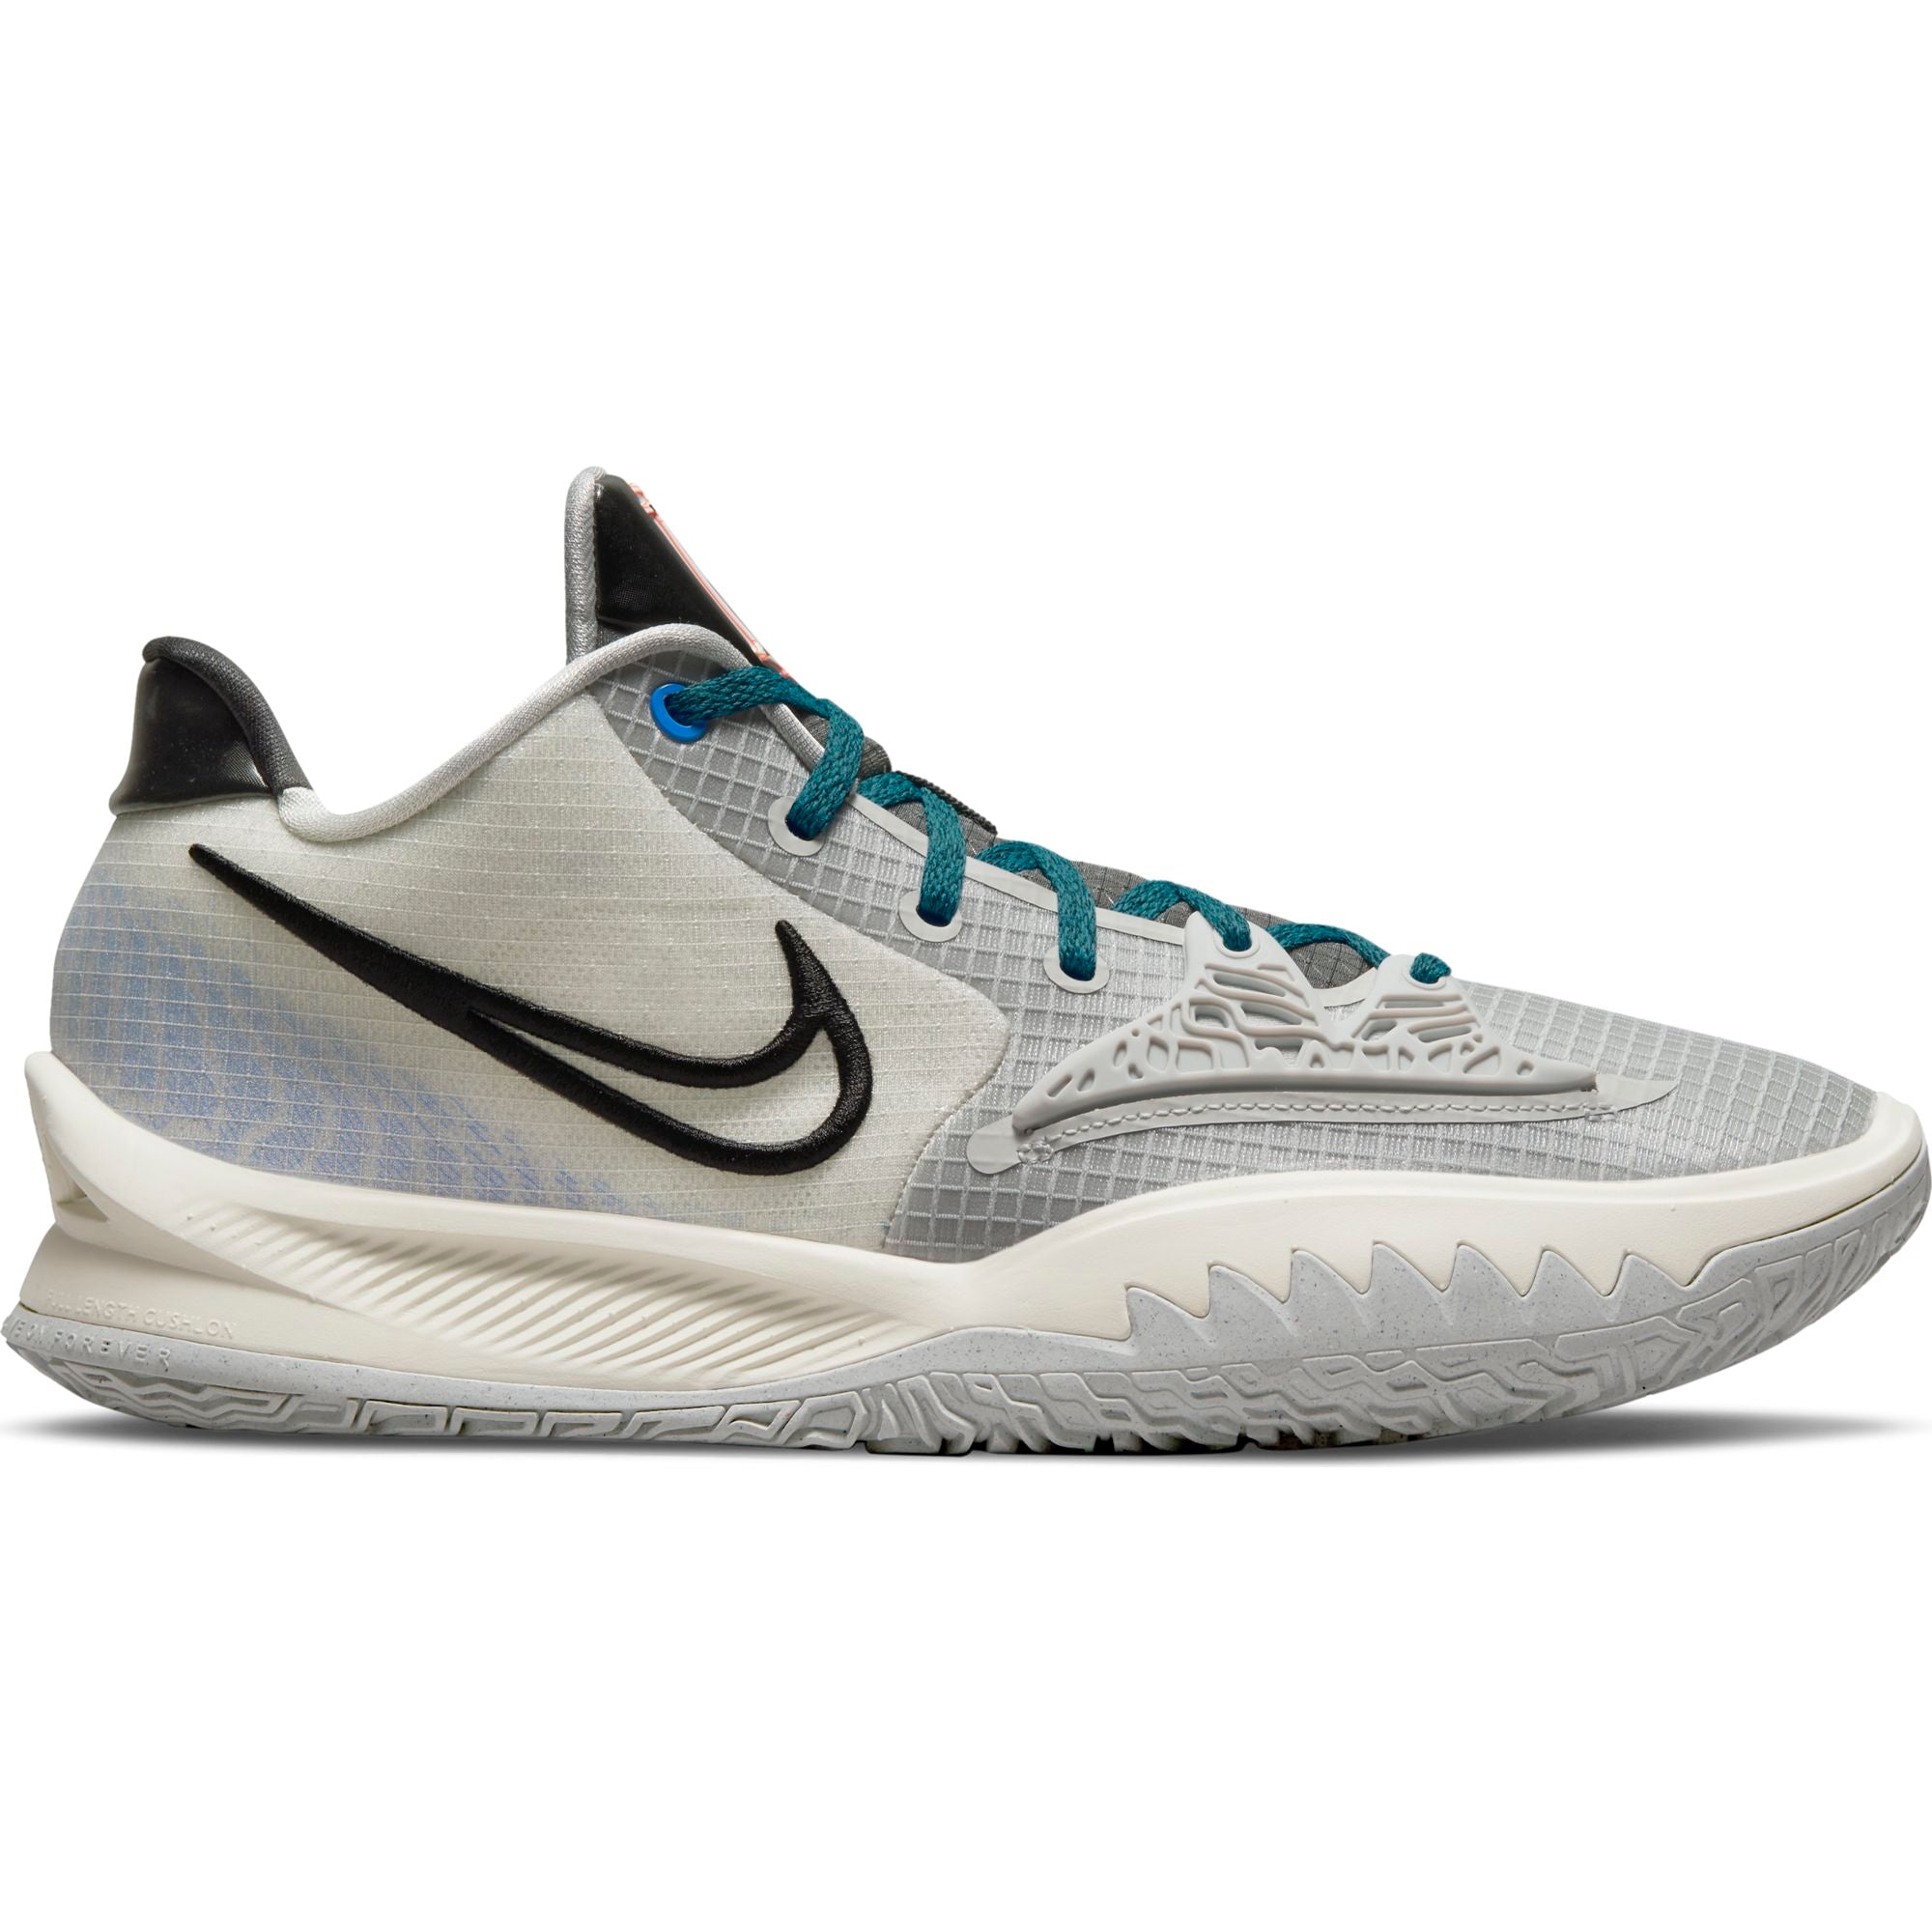 Mens Kyrie Low 4 Basketball Shoe